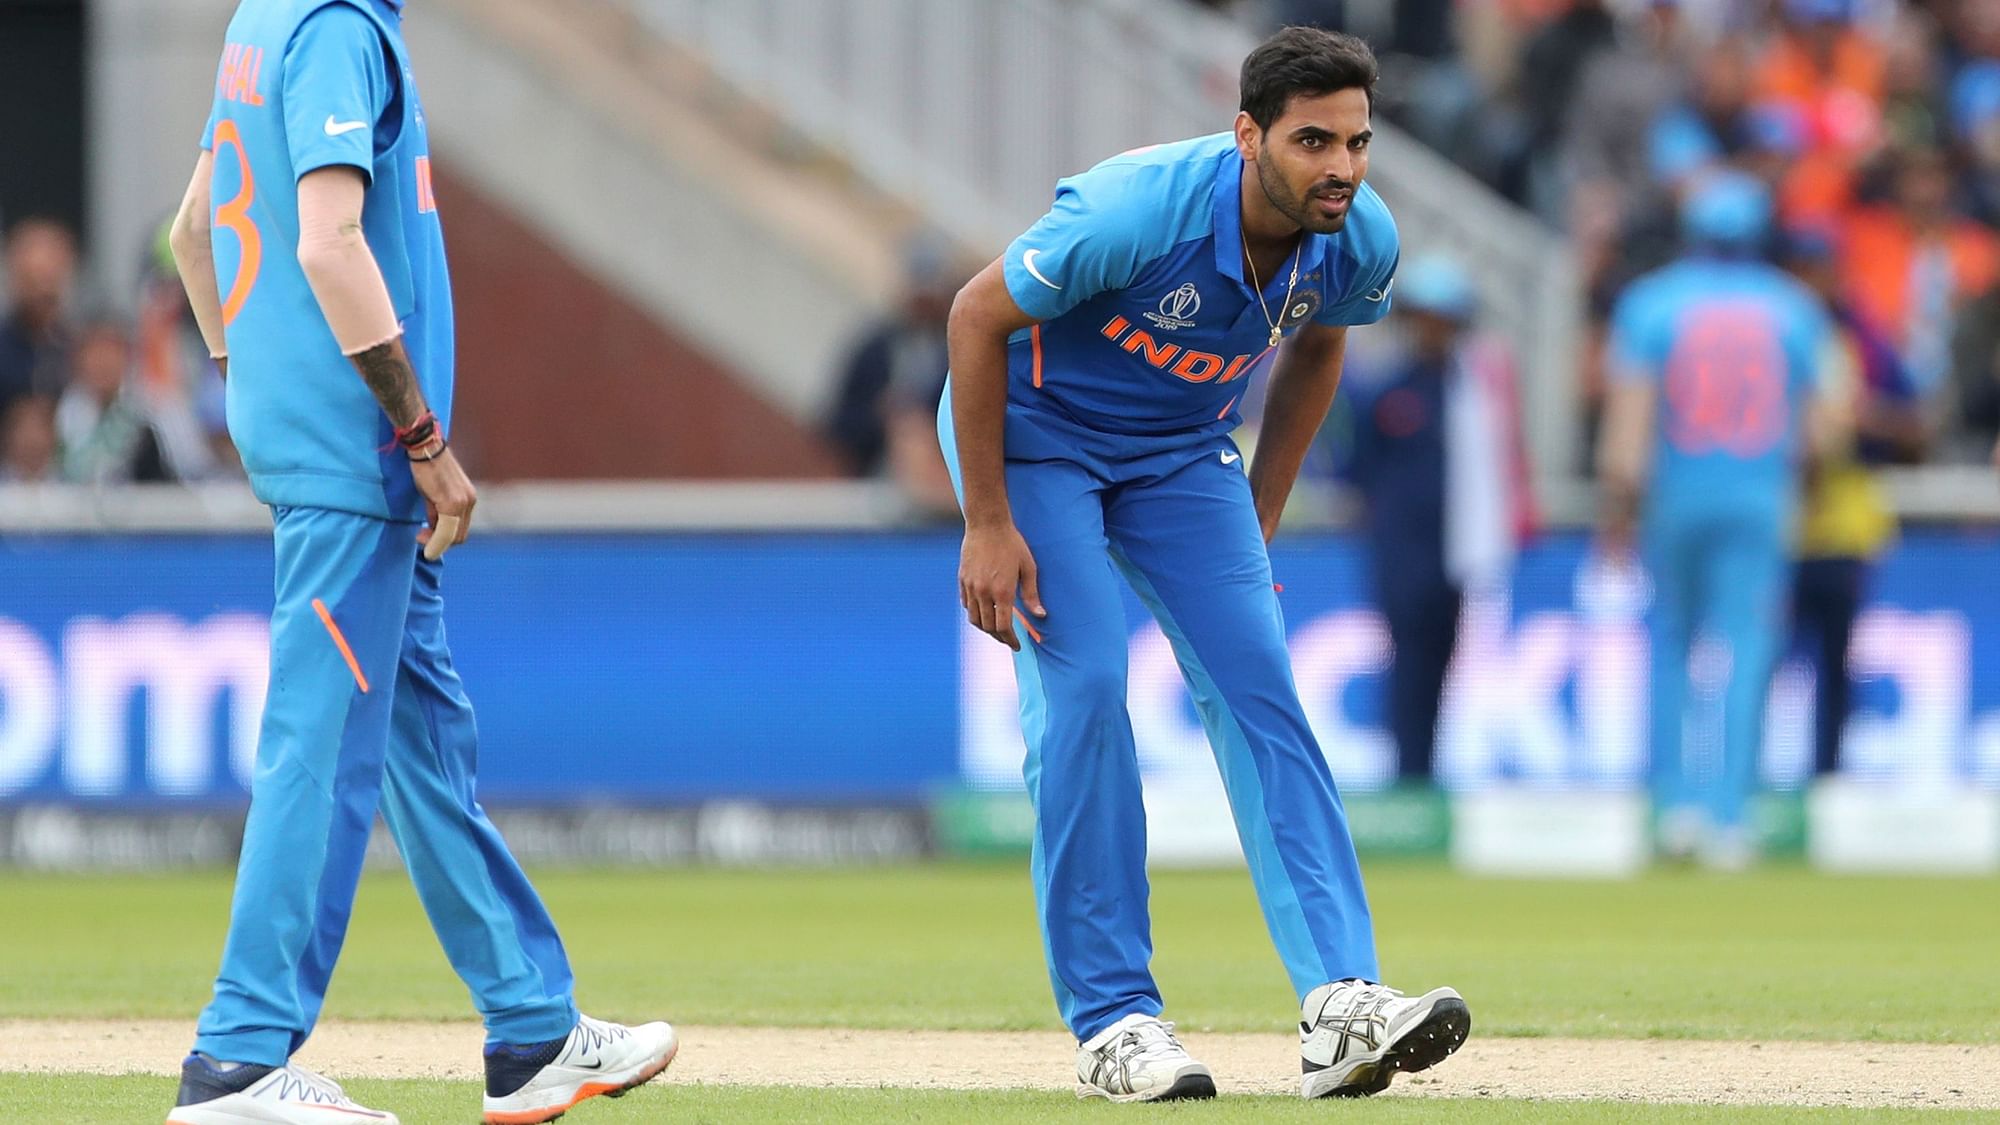 The Indian team is waiting for an update on the status of pacer Bhuvneshwar Kumar’s fitness. 